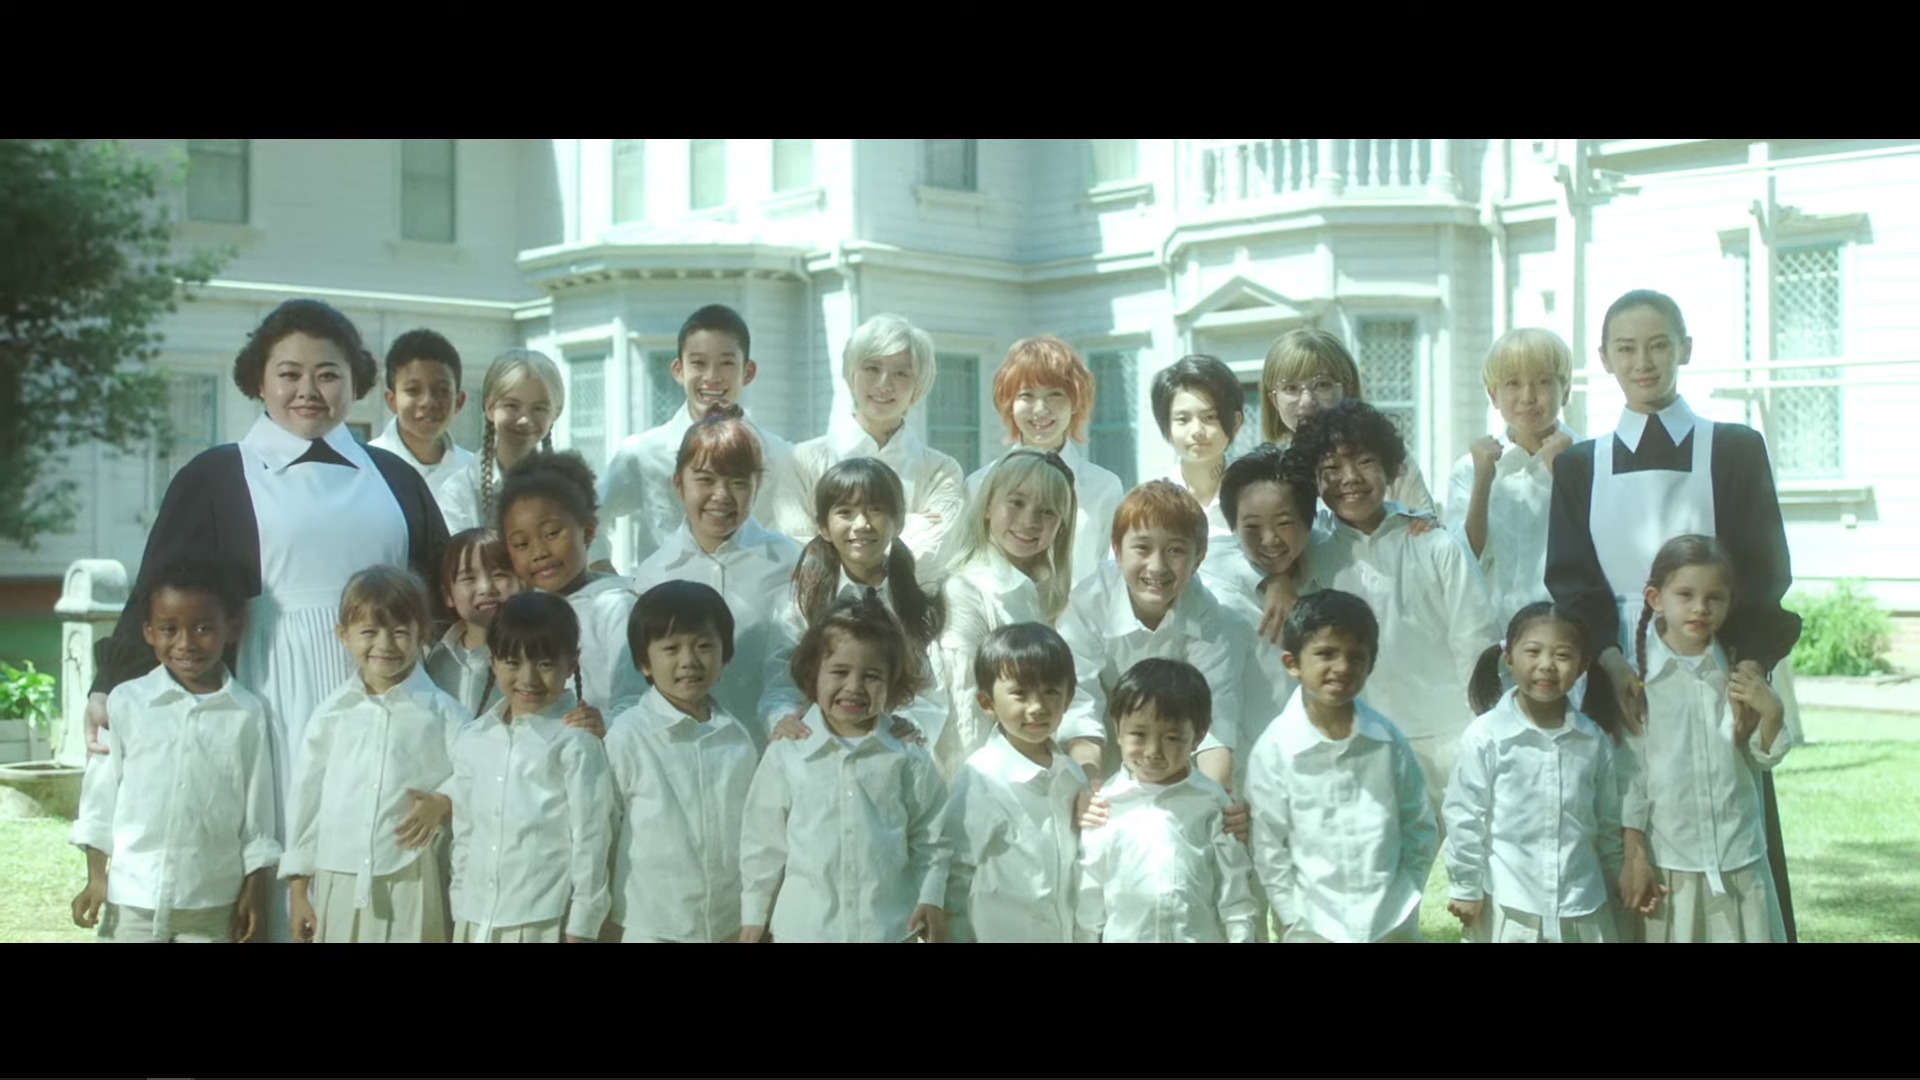 The Promised Neverland Live-Action Has Released A New Trailer